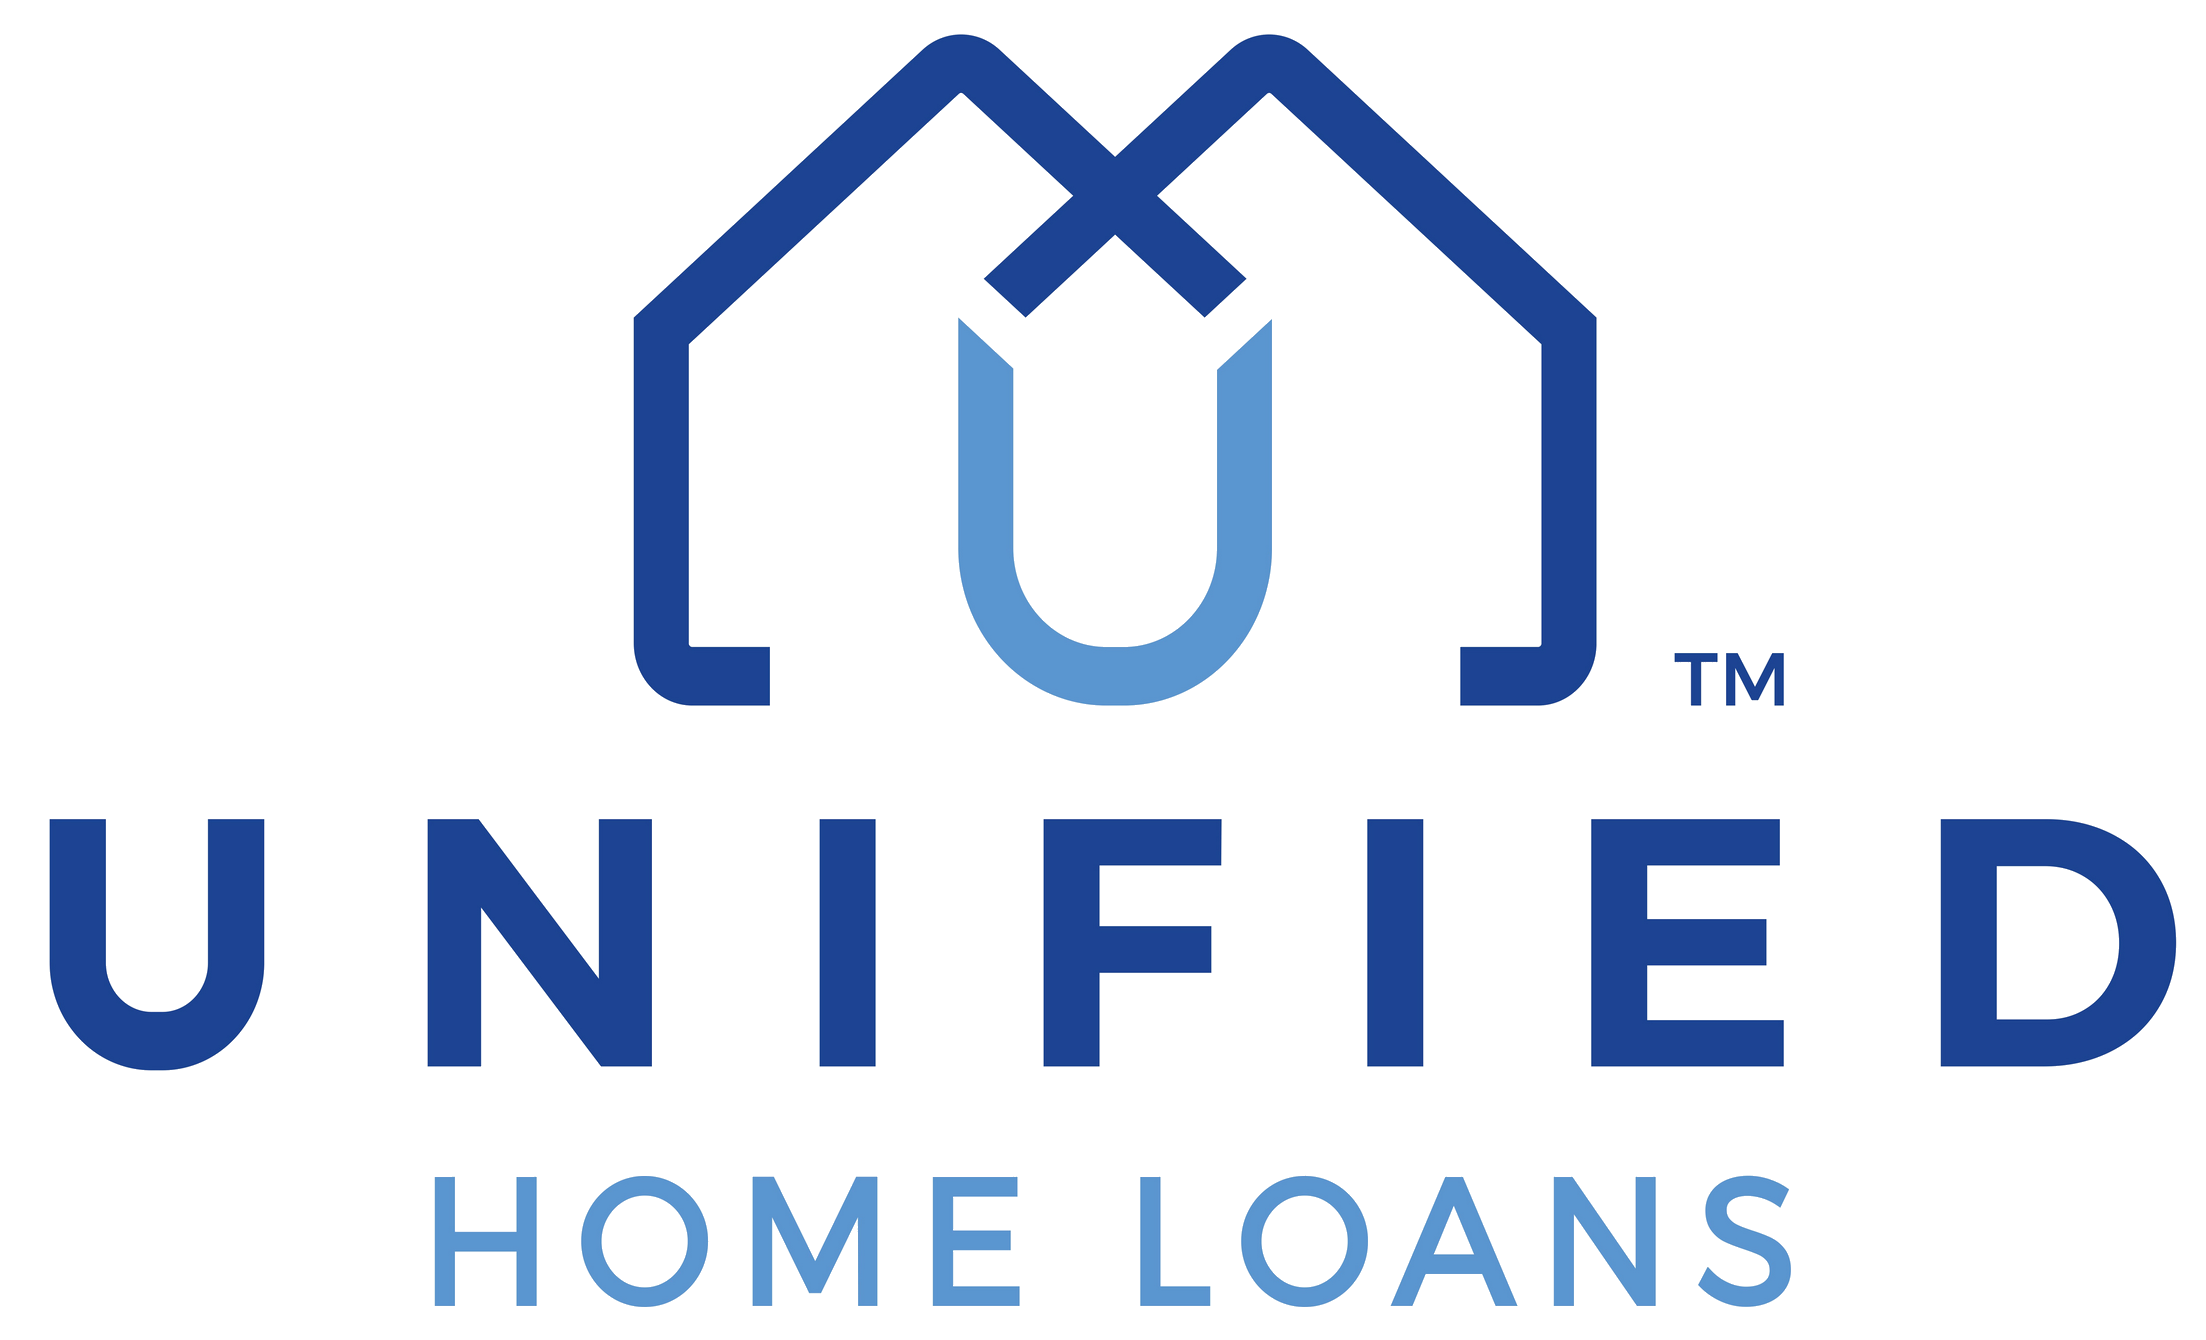 Unified Home Loans | Request A Quote, Mortgage Company Arden-Arcade, Refinance Loans Rocklin CA, Refinance Loans Rocklin CA